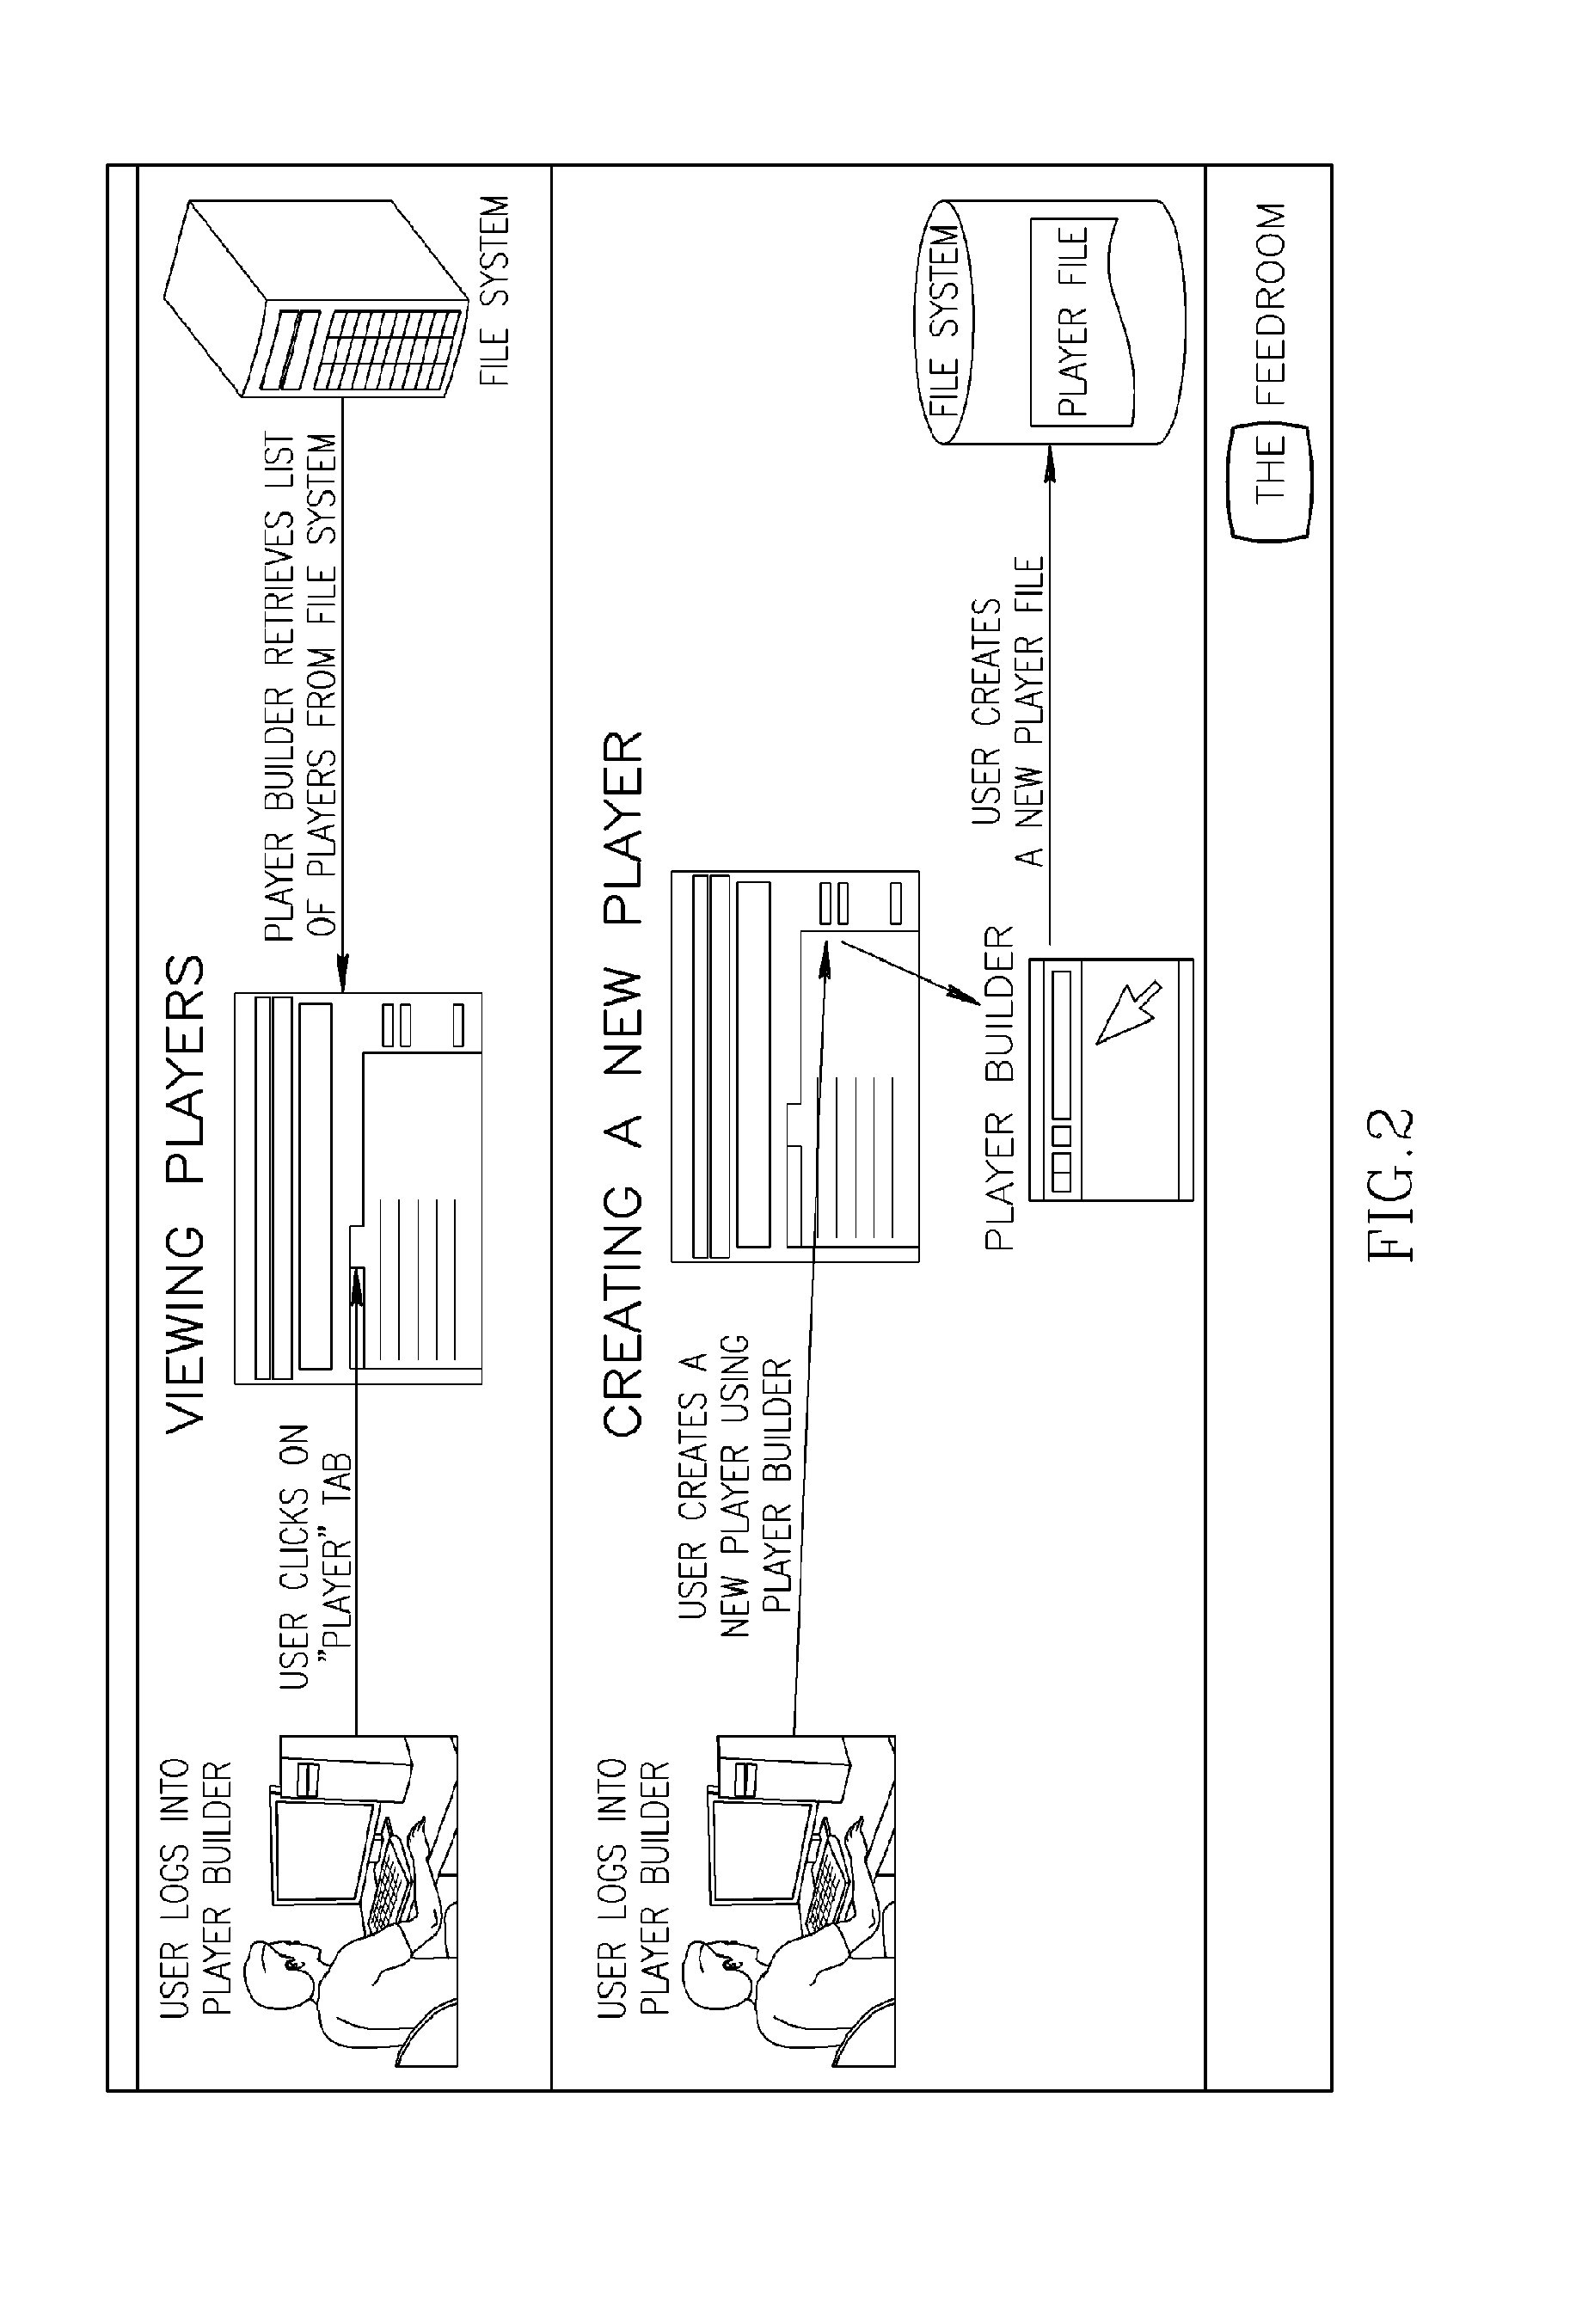 Systems and methods for realtime creation and modification of a dynamic media player and disabled user compliant video player